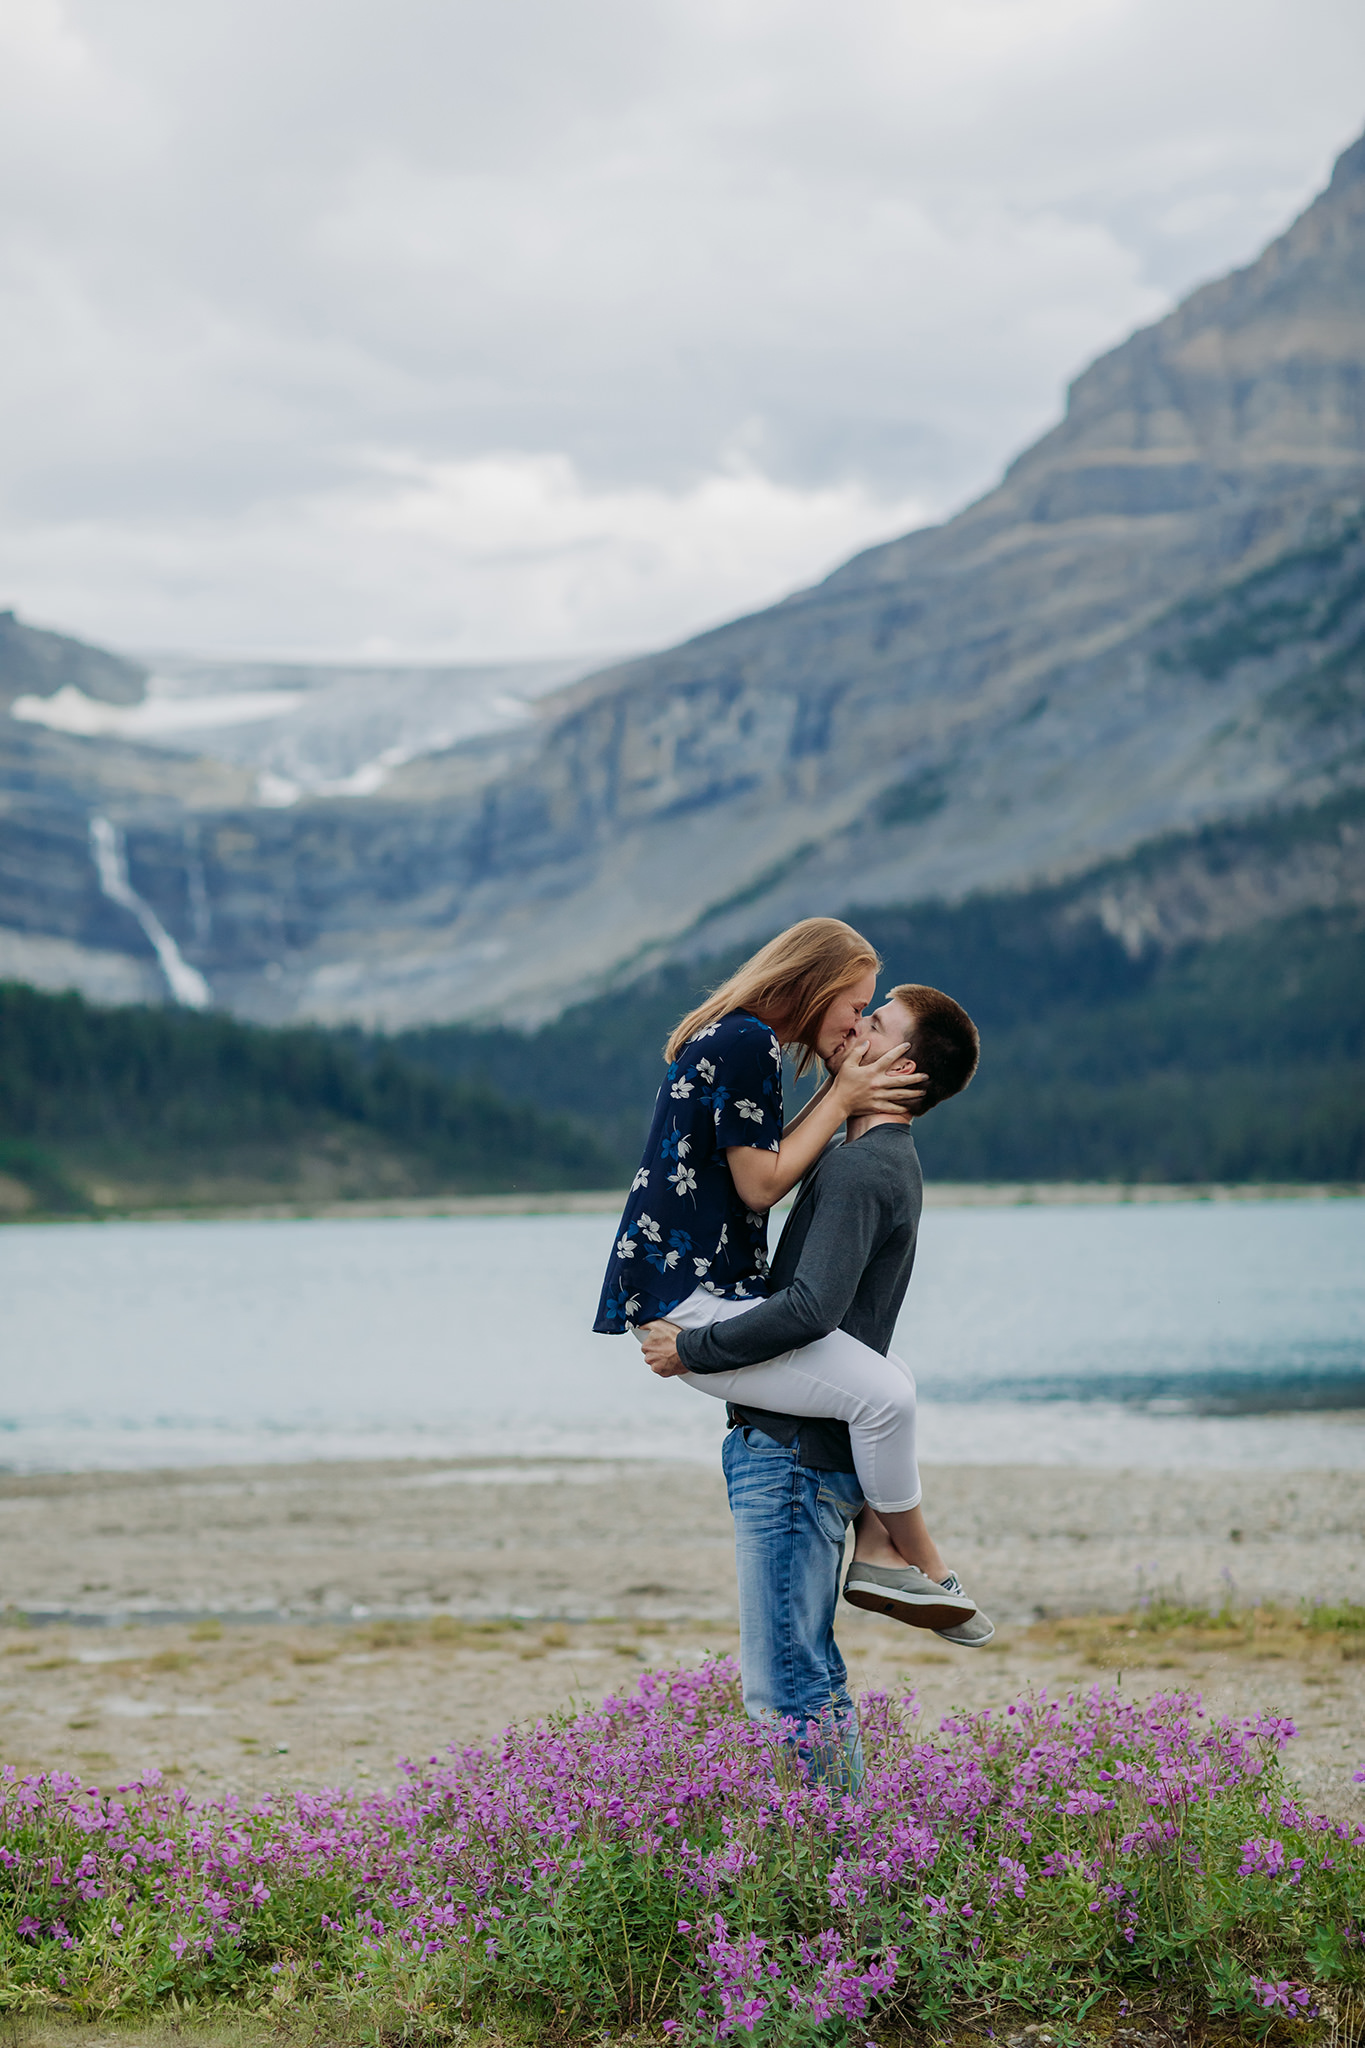 Bow Lake summer engagement photography session along Icefields Parkway in Banff National Park photographed by local engagement & elopement photographer ENV Photography